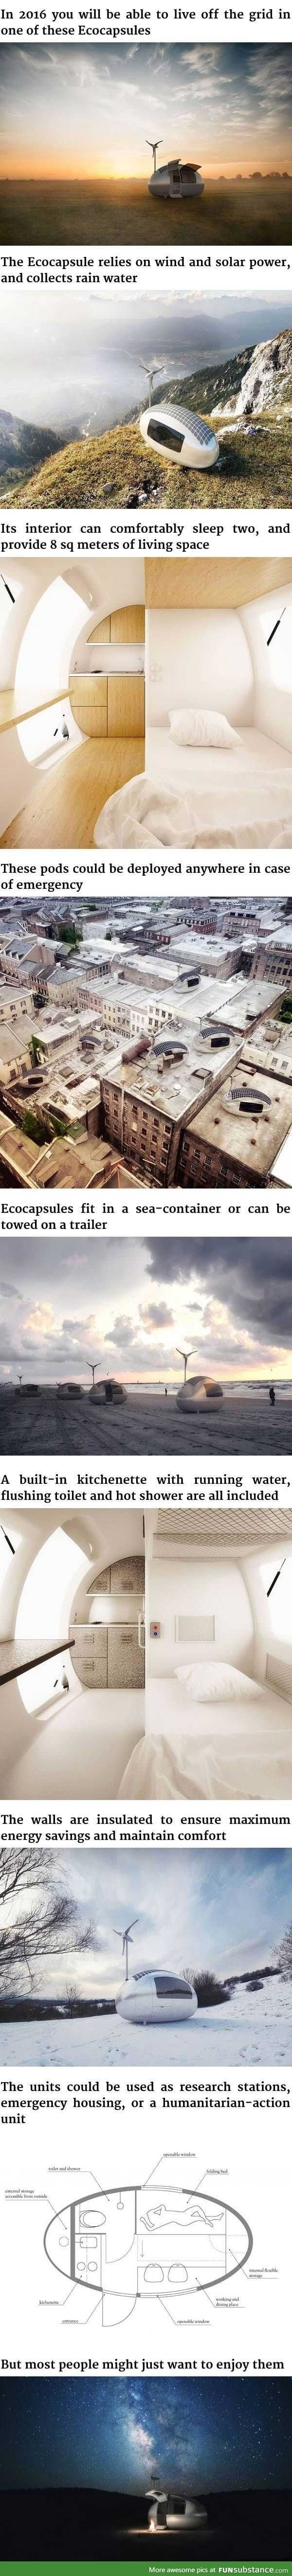 Ecocapsules:mini wind/solar powered home lets you live off the grid anywhere in the world